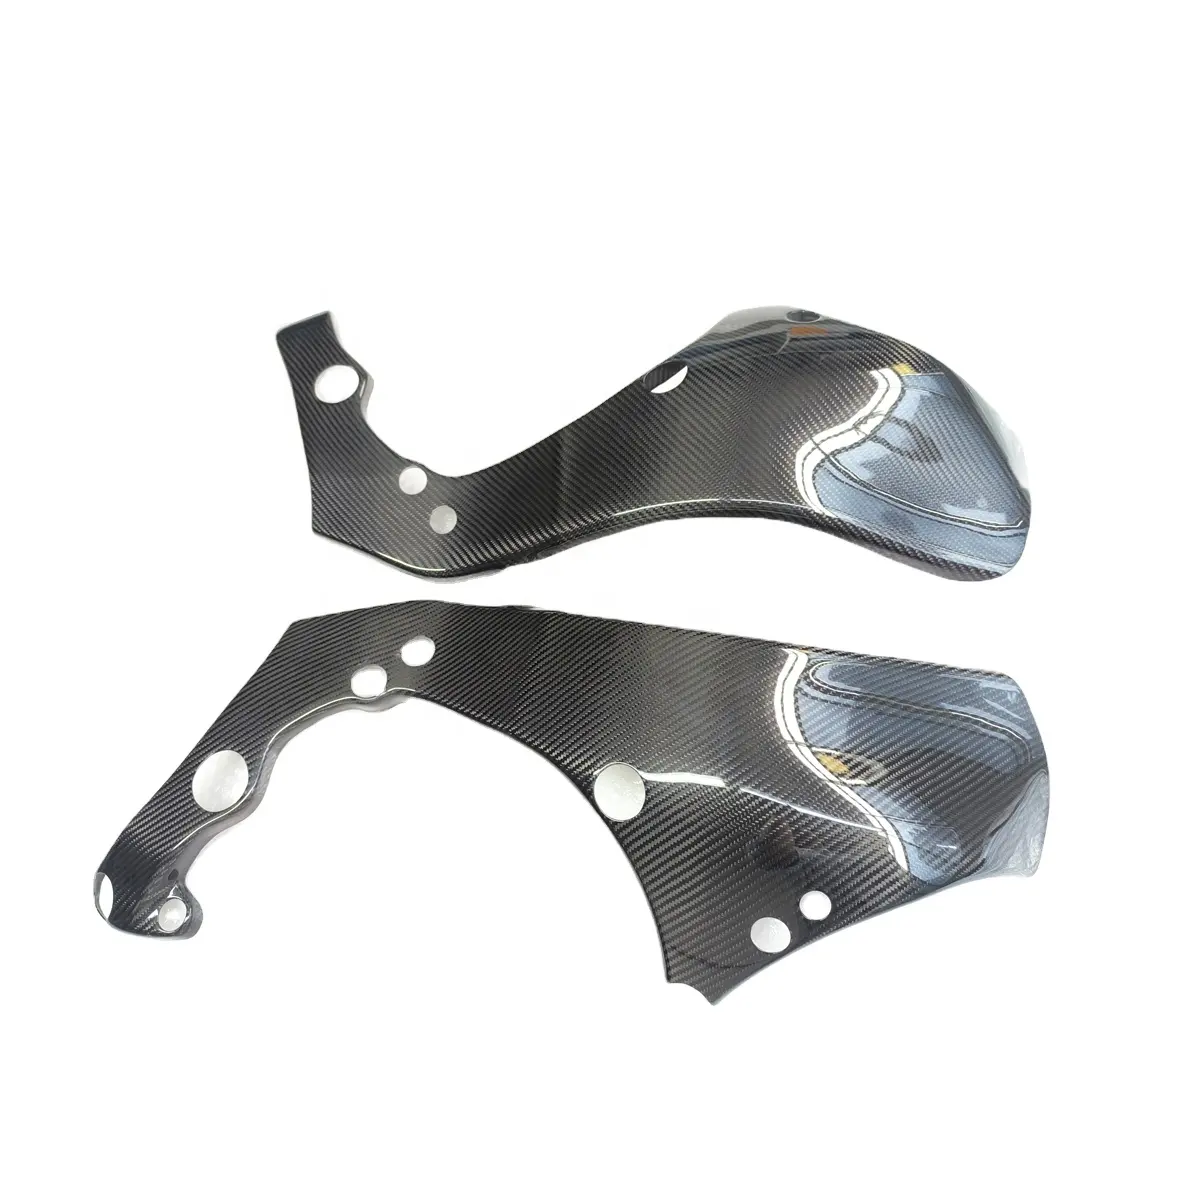 Quality carbon fiber motorcycle parts glossy carbon frame covers thin covers for Kawasaki ZX10R 2016+